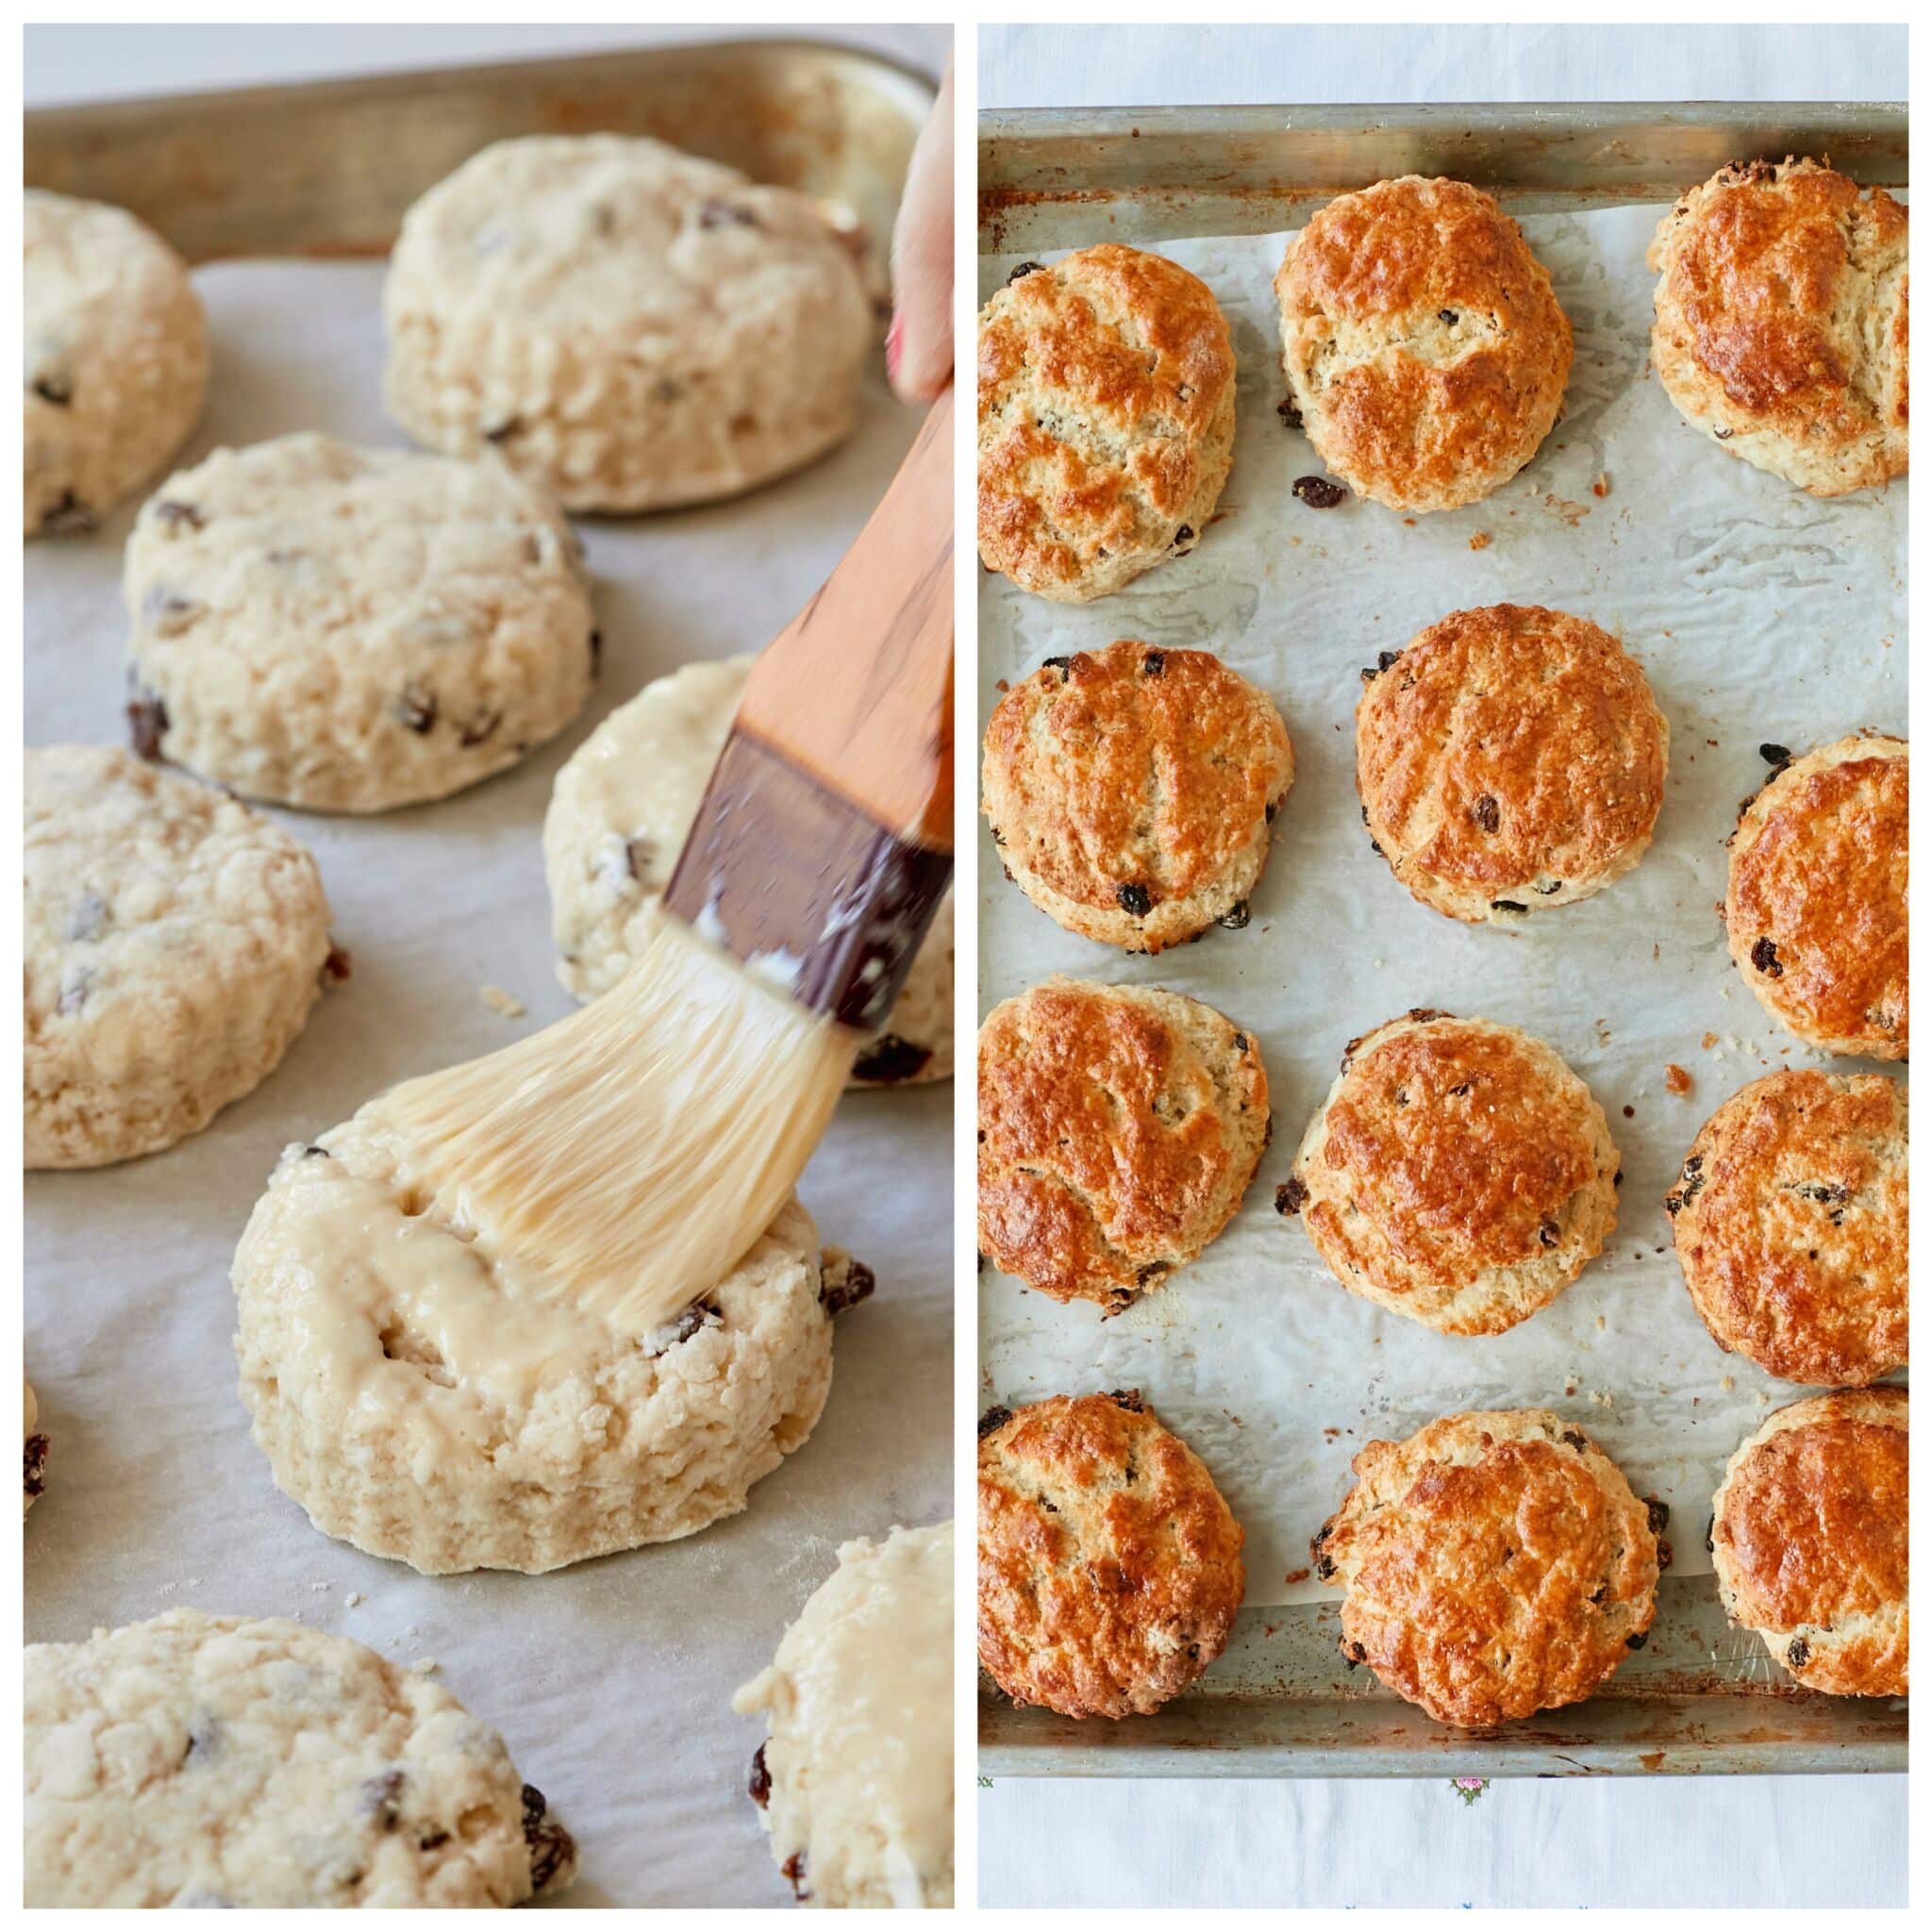 How to bake Irish Scones: brush the top with egg wash and bake them until golden brown. 